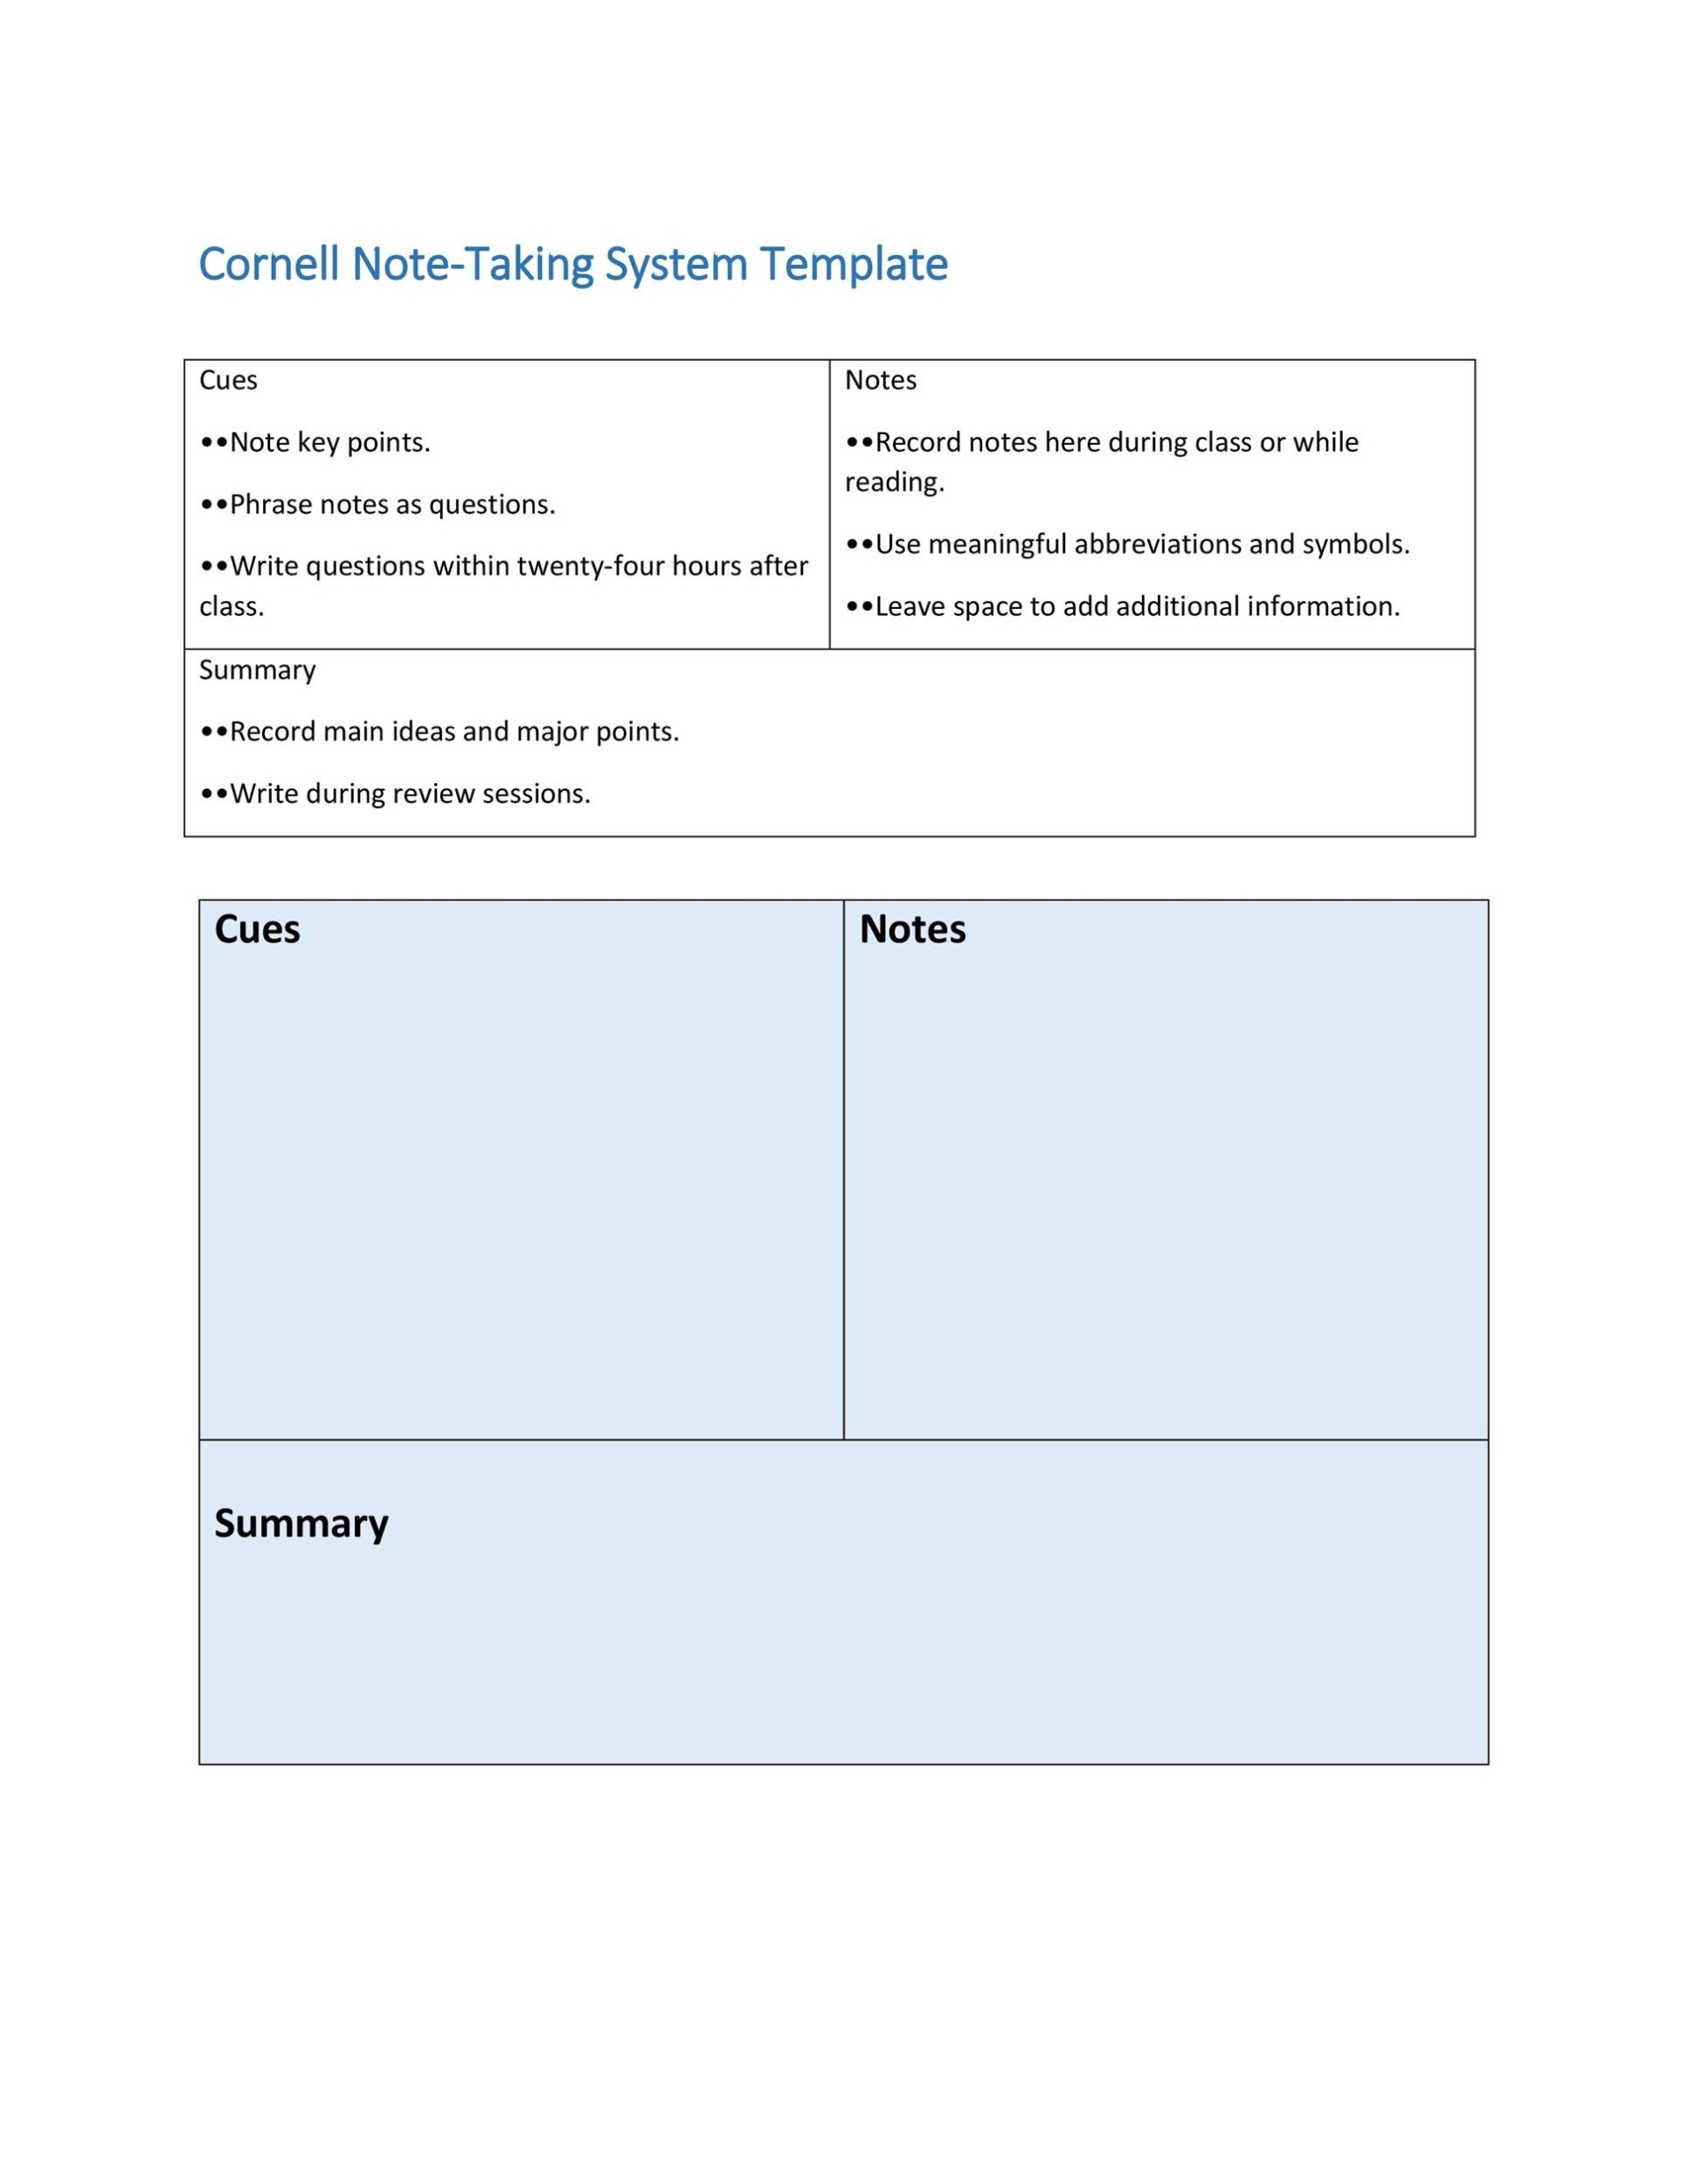 37 Cornell Notes Templates & Examples [Word, Excel, Pdf] ᐅ With Regard To Note Taking Word Template